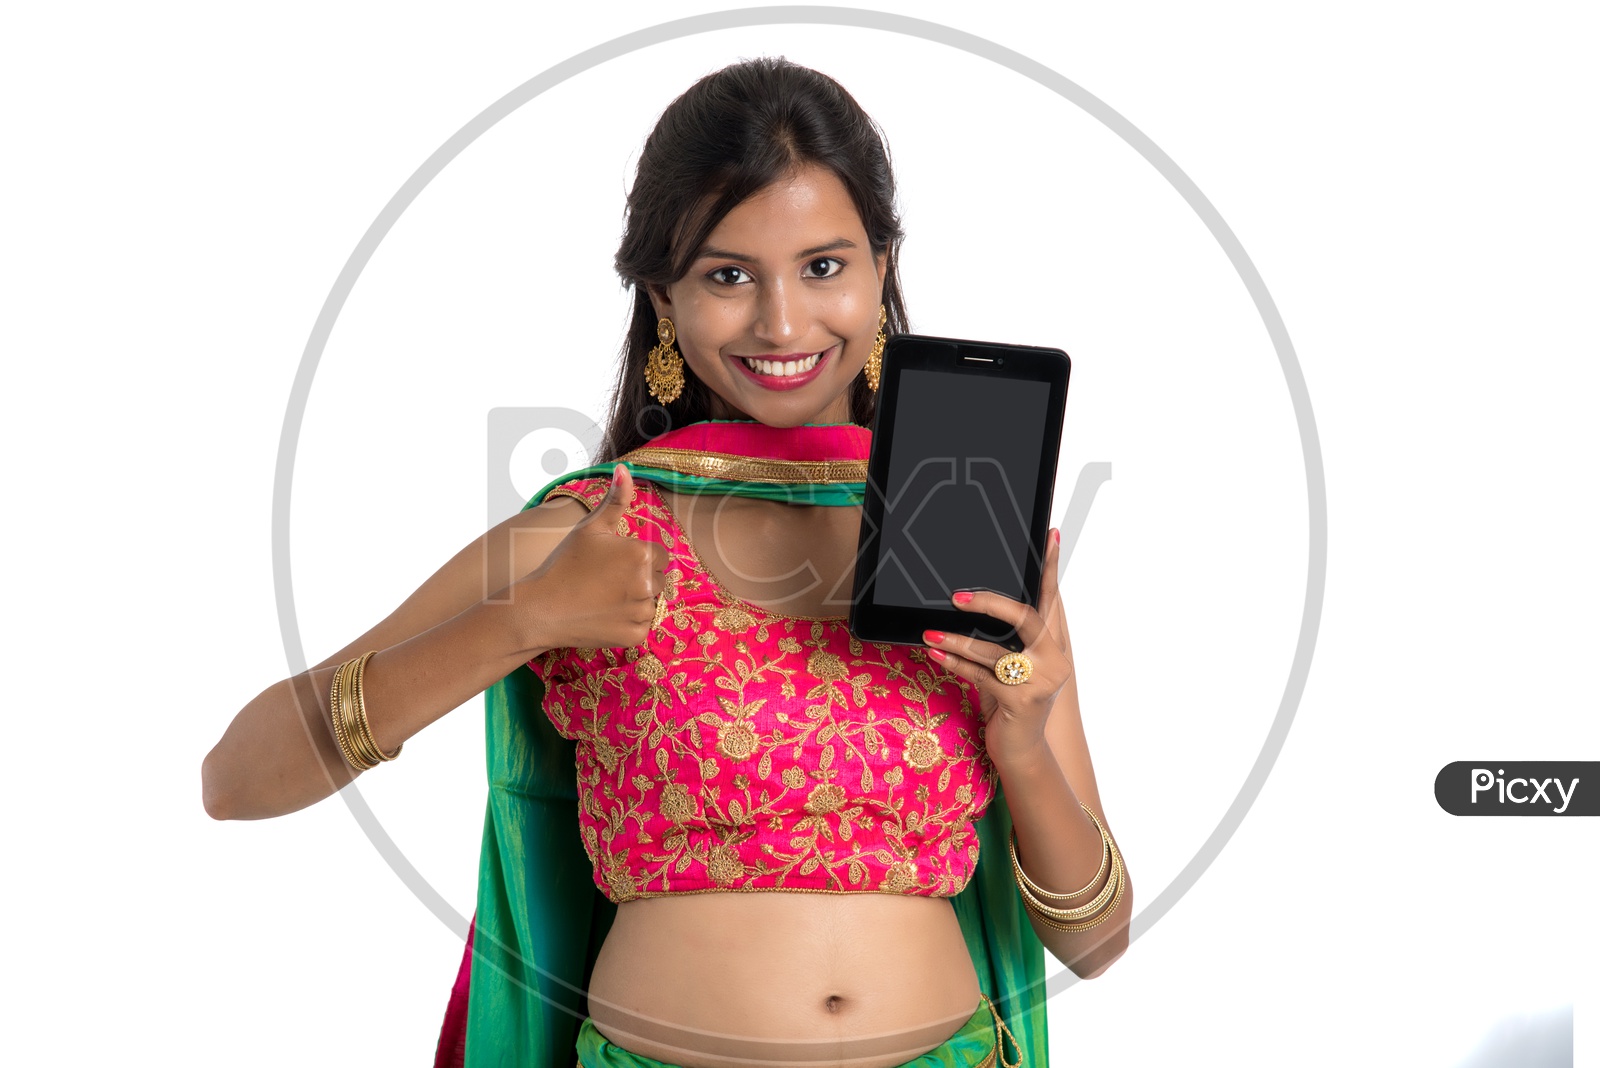 Beautiful Traditional Indian Girl Showing Smart Phone Screen with a Smile on Her Face